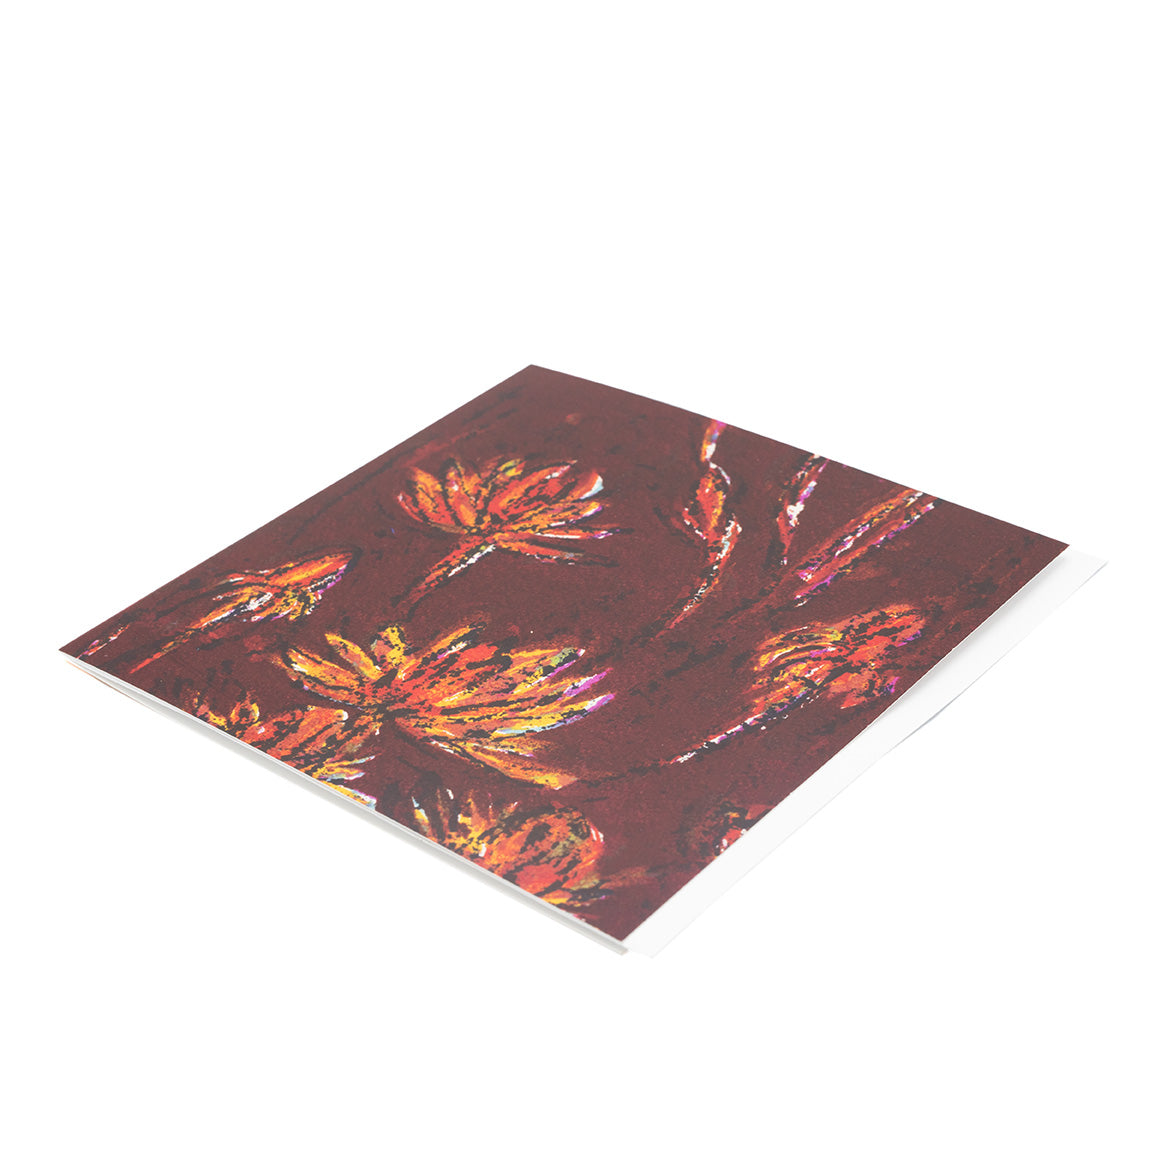 A single card with envelope lying on an angle against a white backdrop. This is the dark red Trinidad colourway artwork.